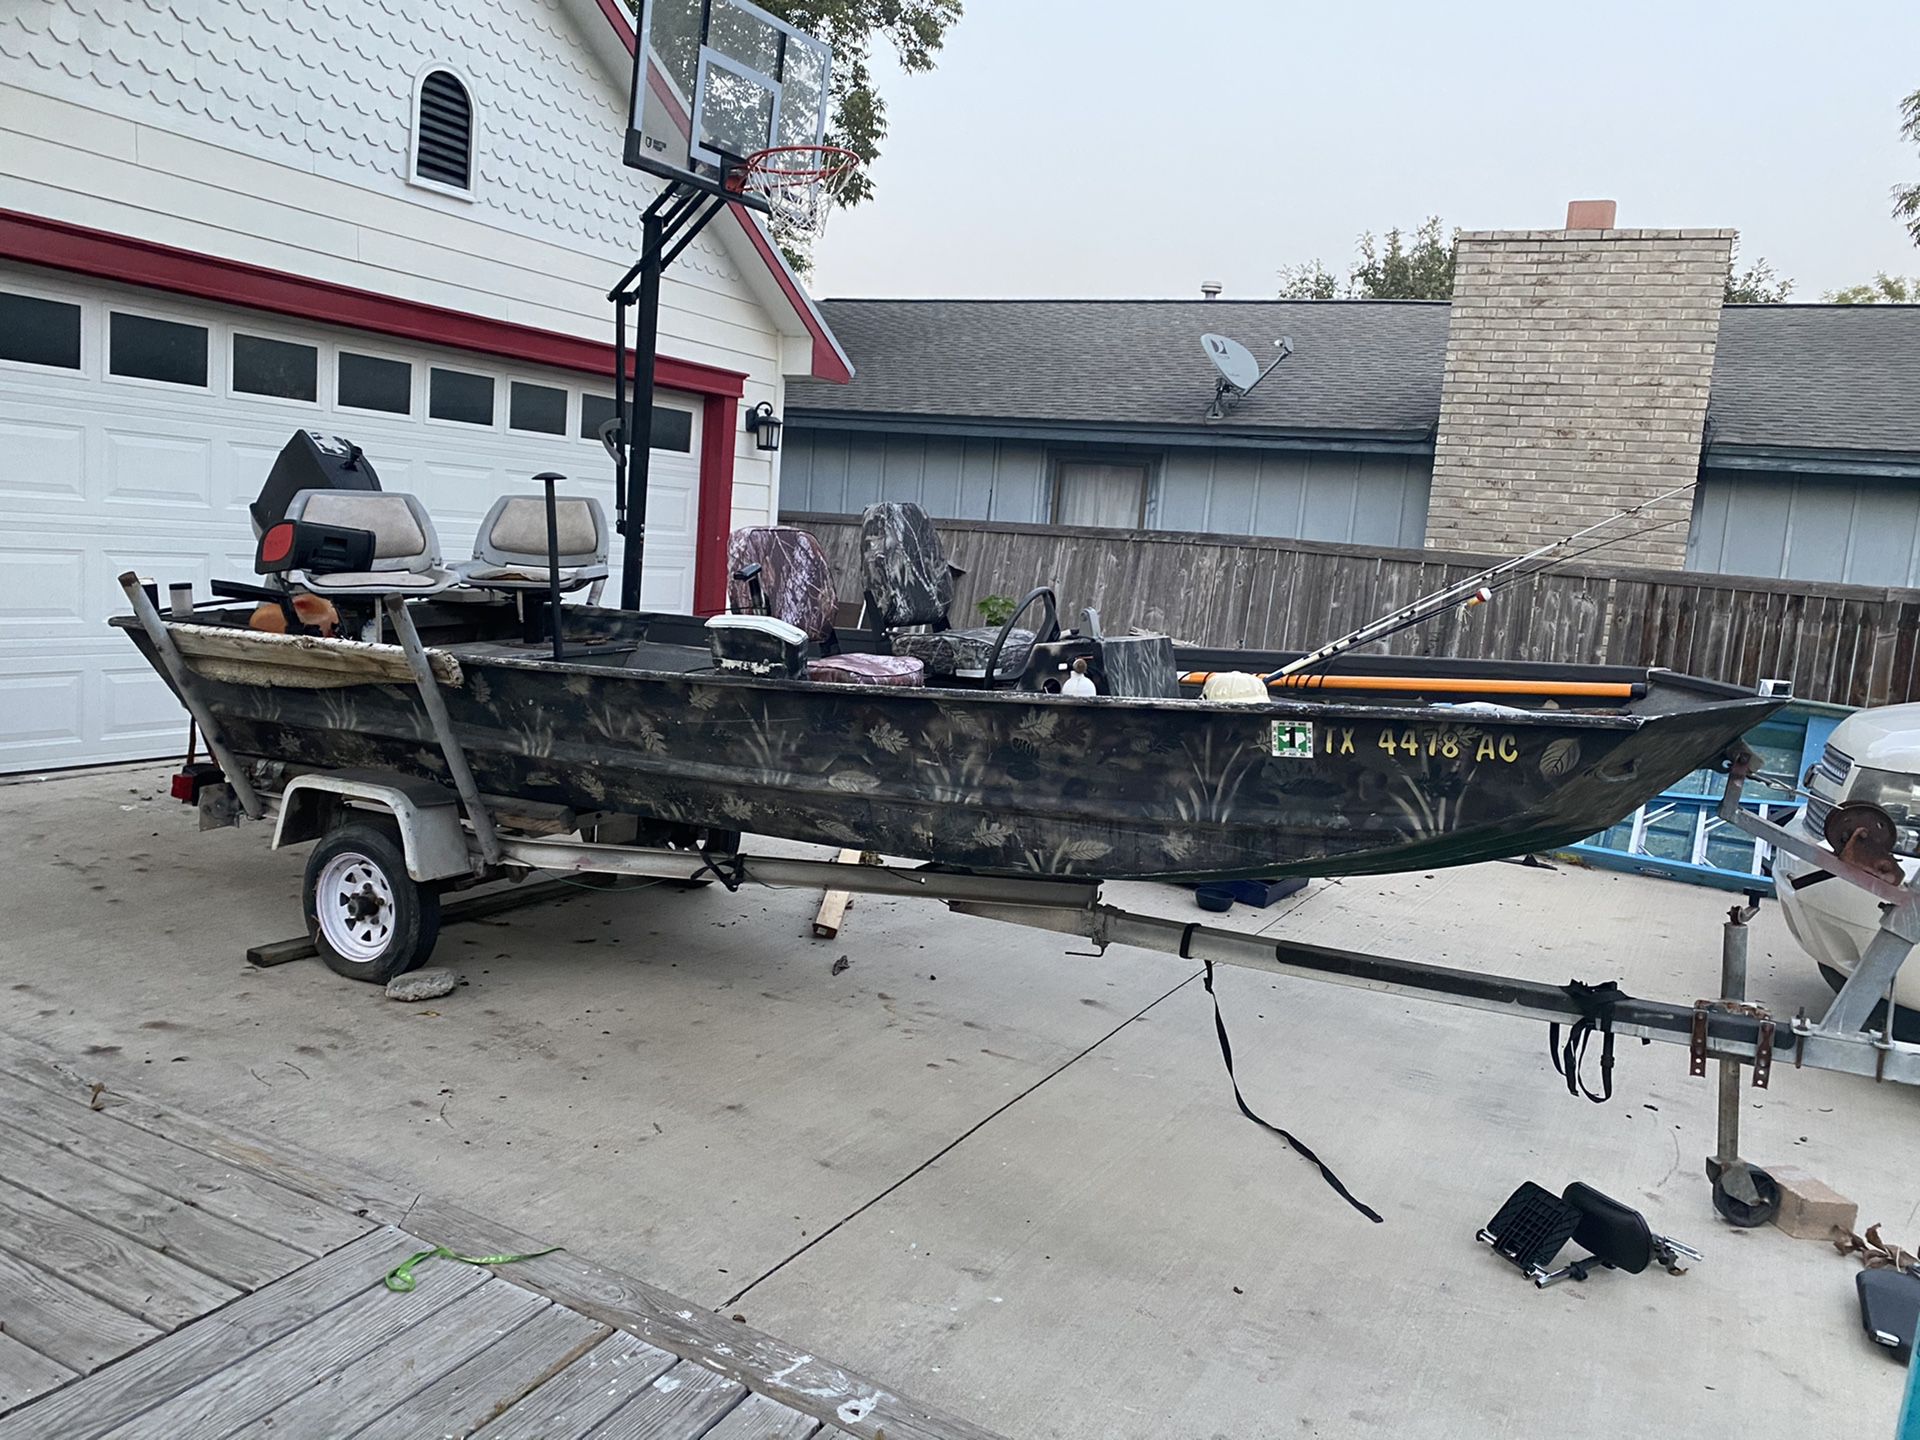 Fishing Boat and Trailer